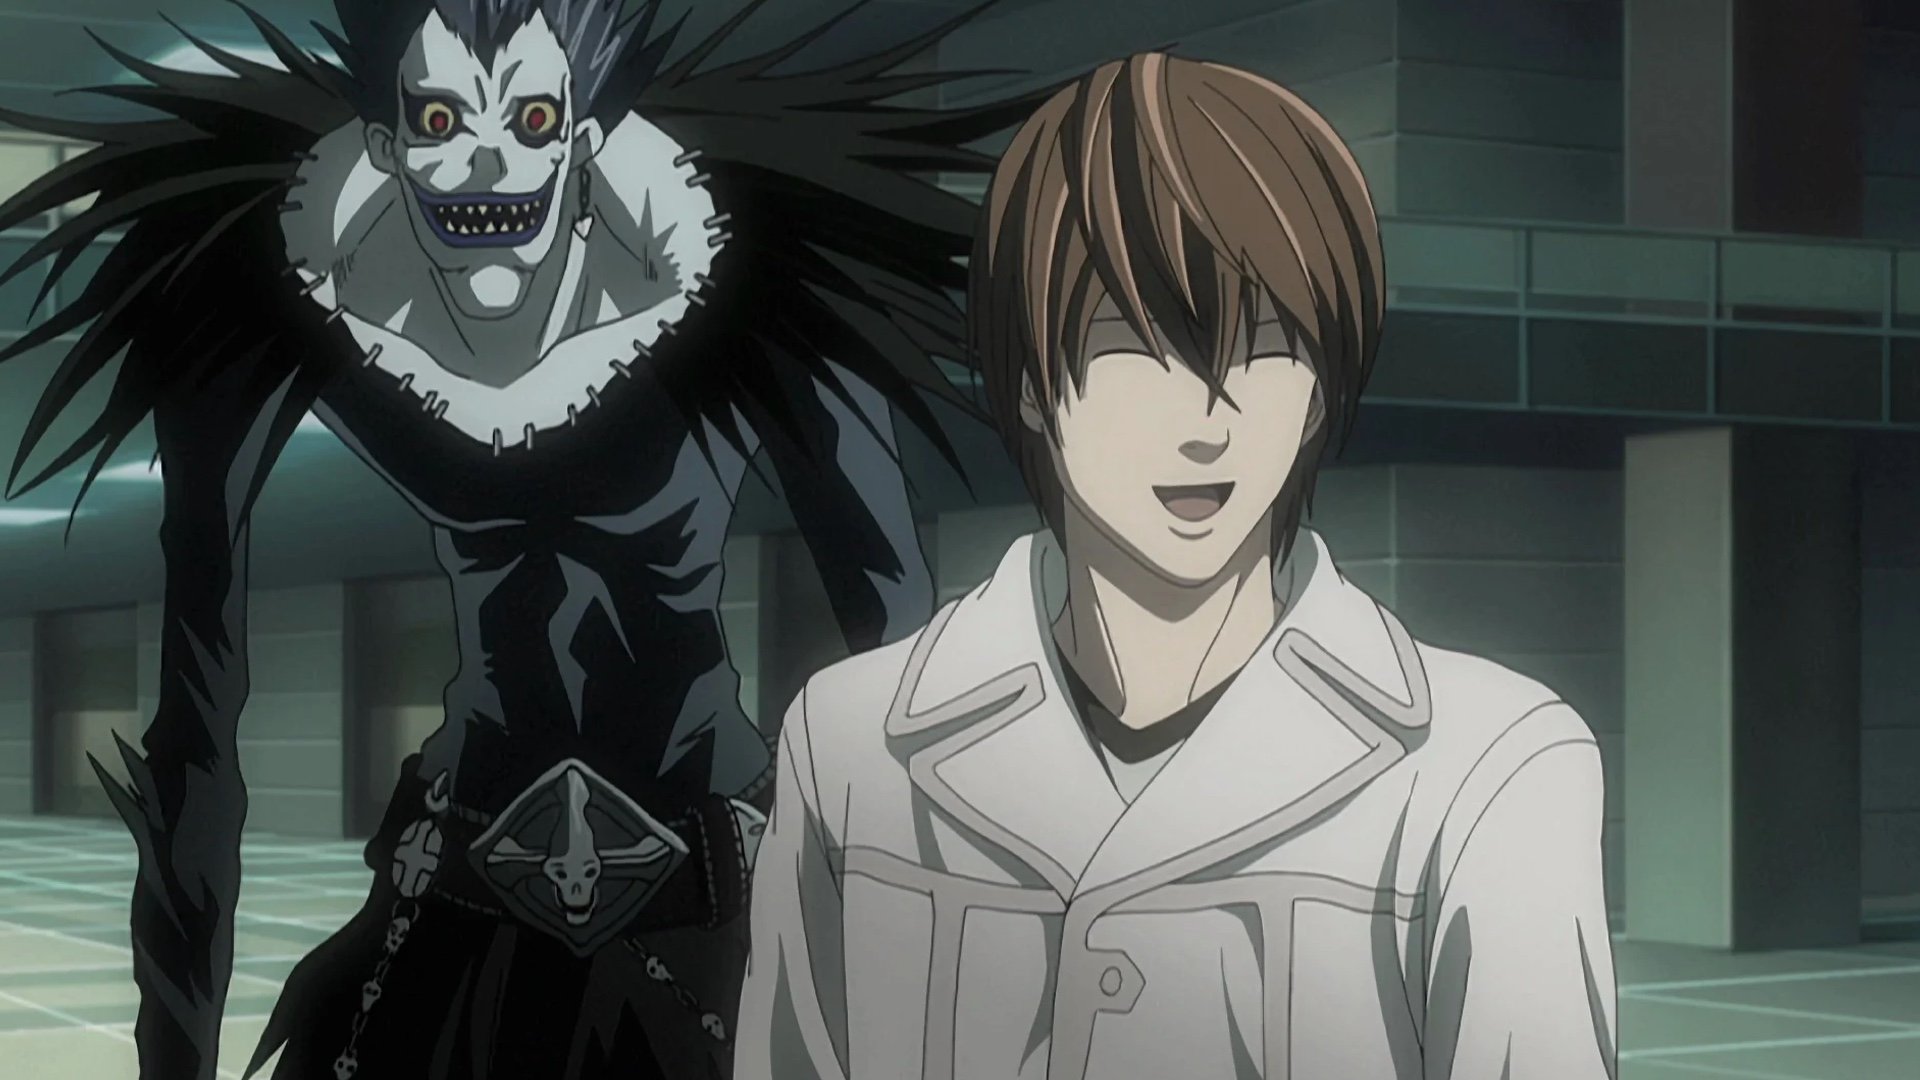 New Death Note Live Action Adaptation Announced by Netflix and